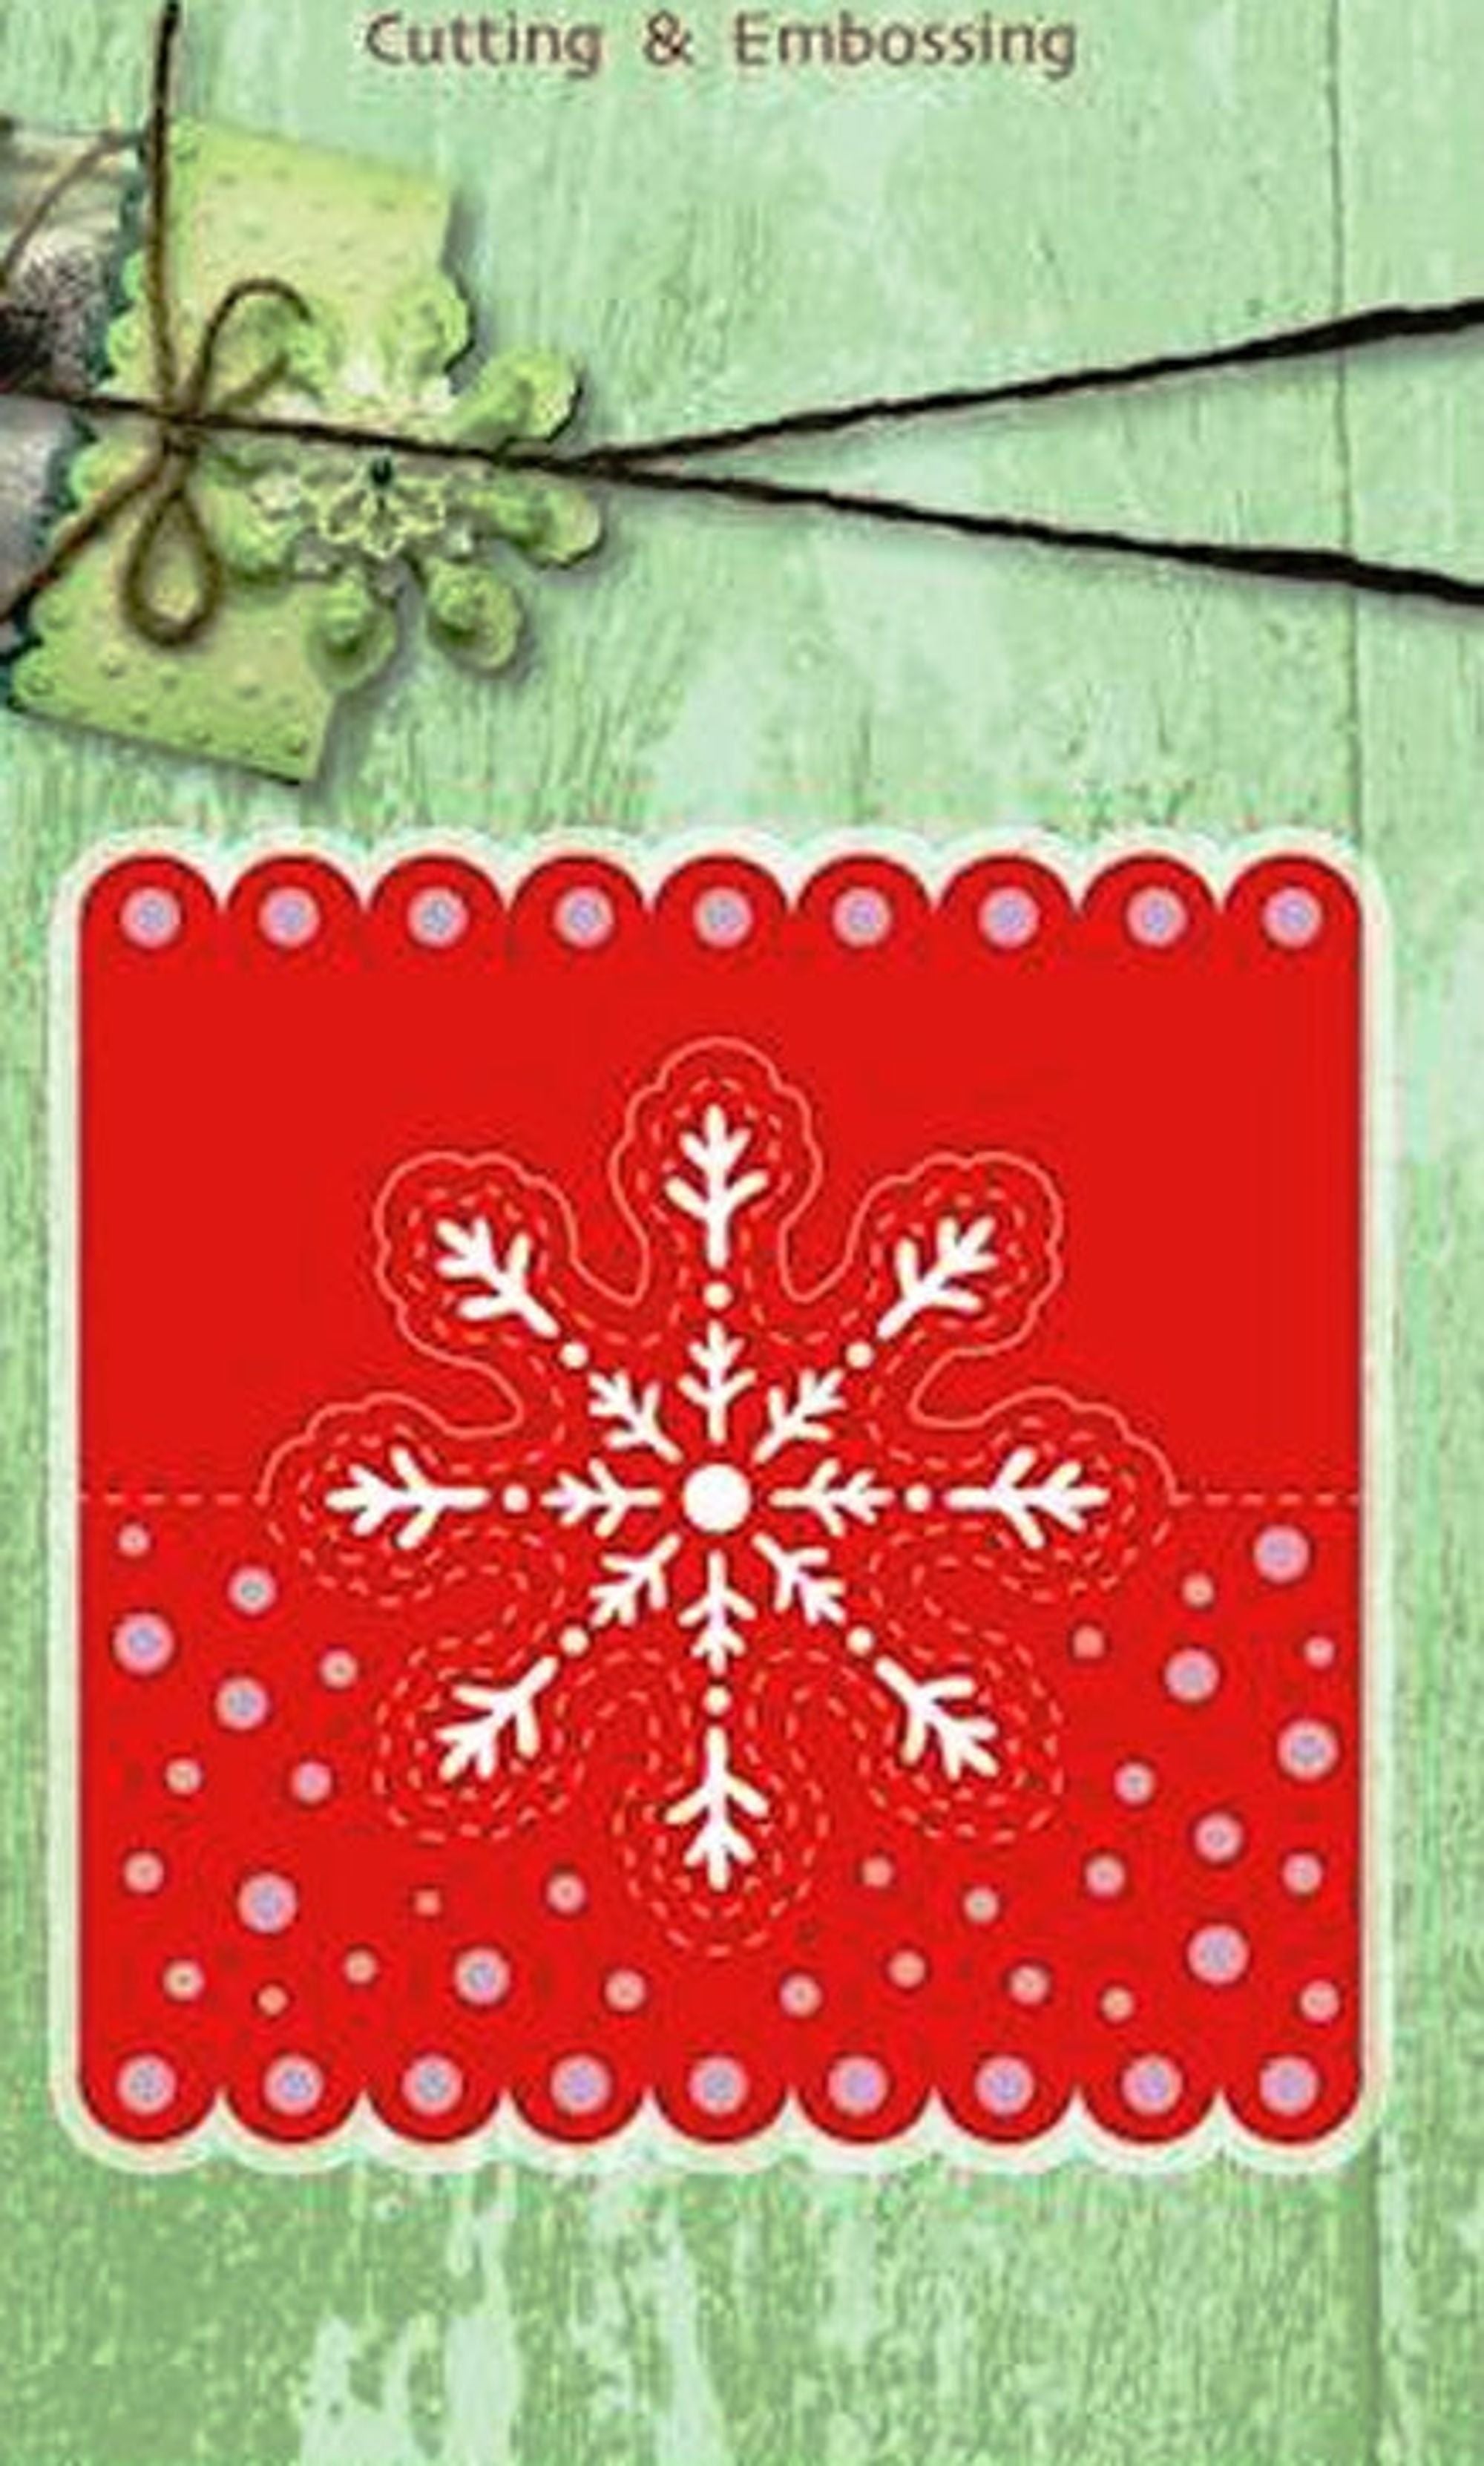 Cutting and Embossing die - Headcard snowflake